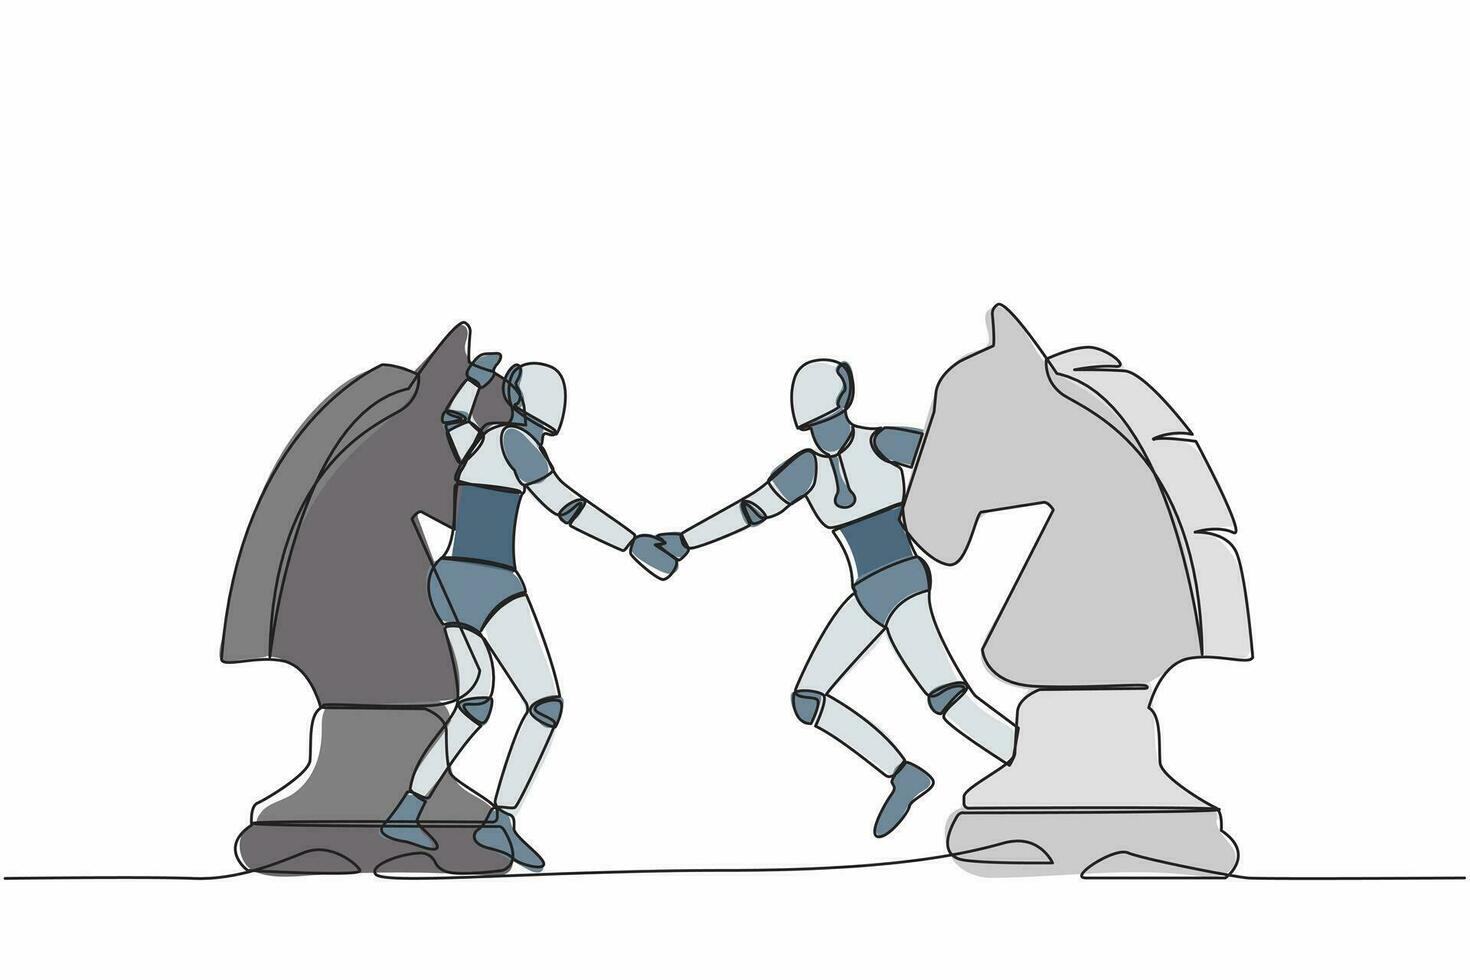 Single one line drawing robot competitors standing on horse chess piece, handshaking after finish agreement. Future technology development industry. Continuous line design graphic vector illustration